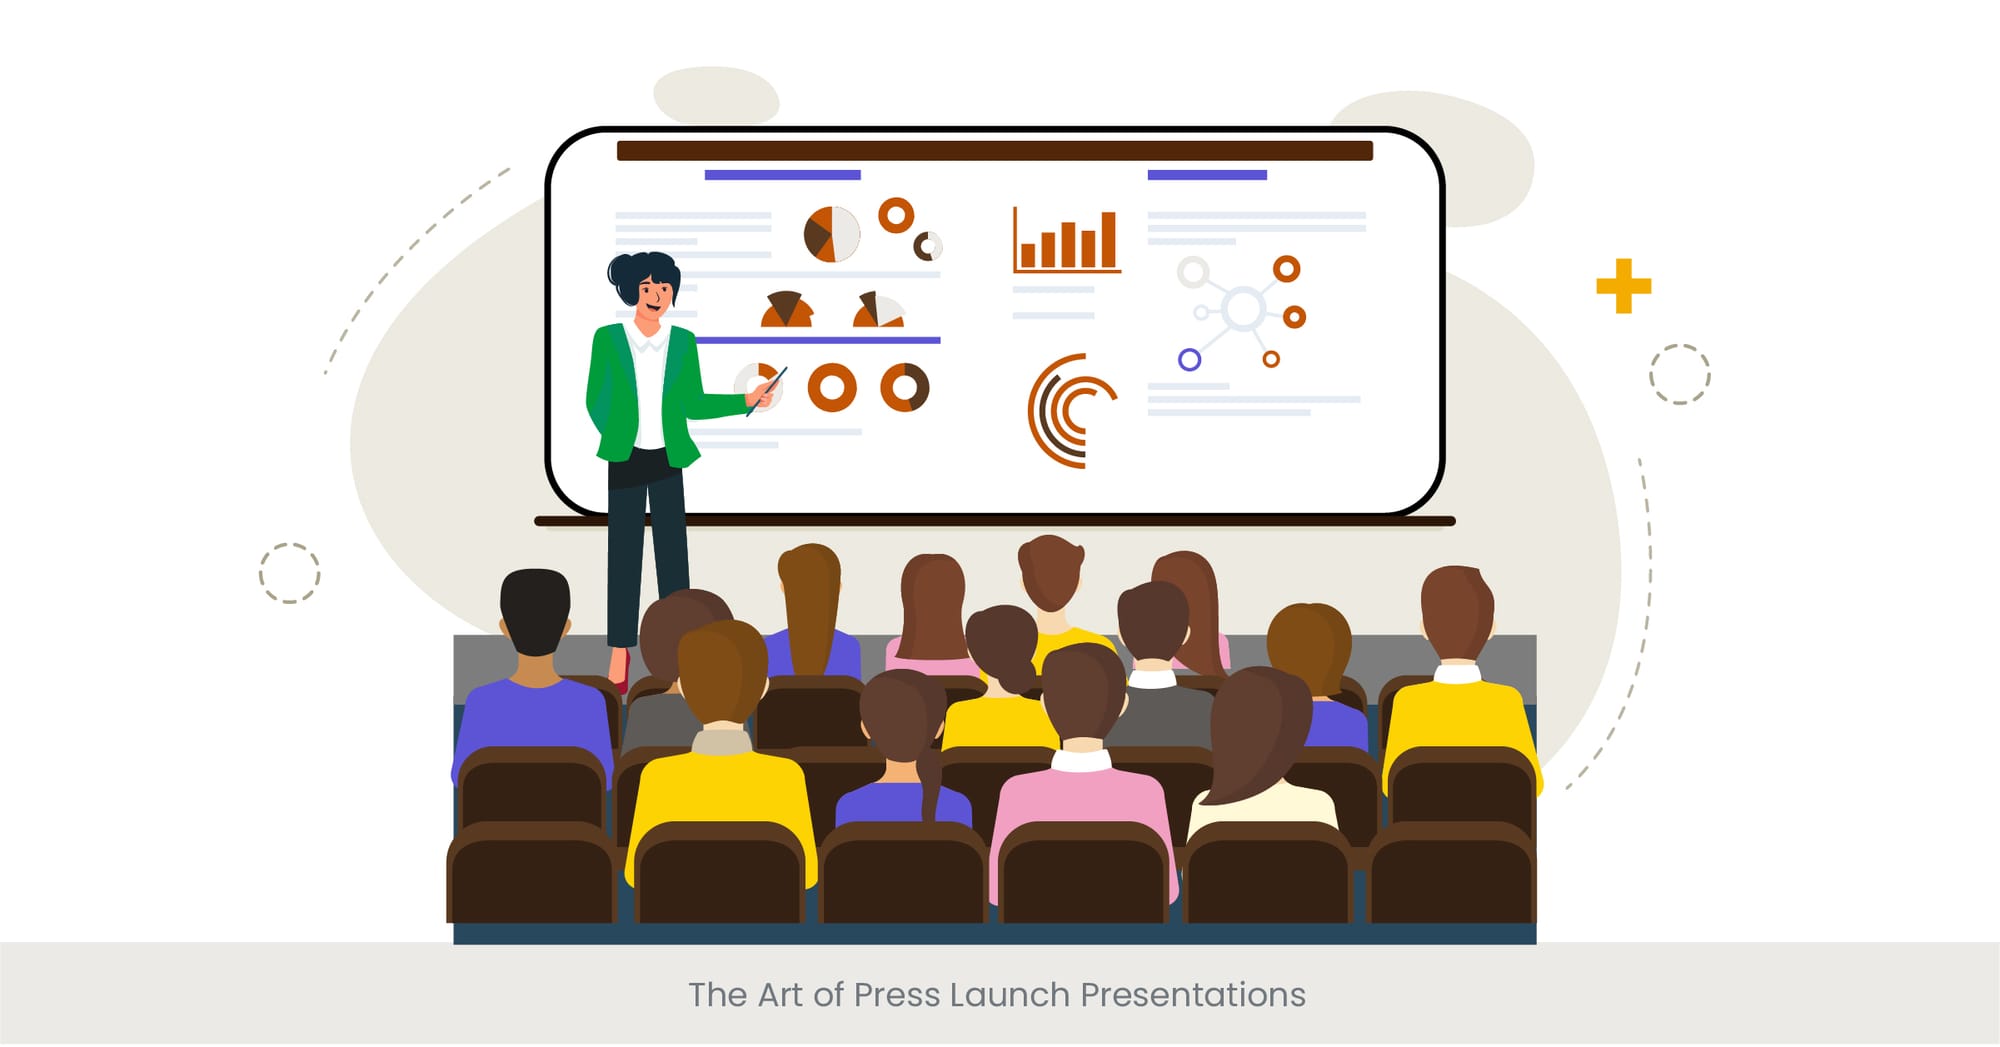 The Art of Press Launch Presentations